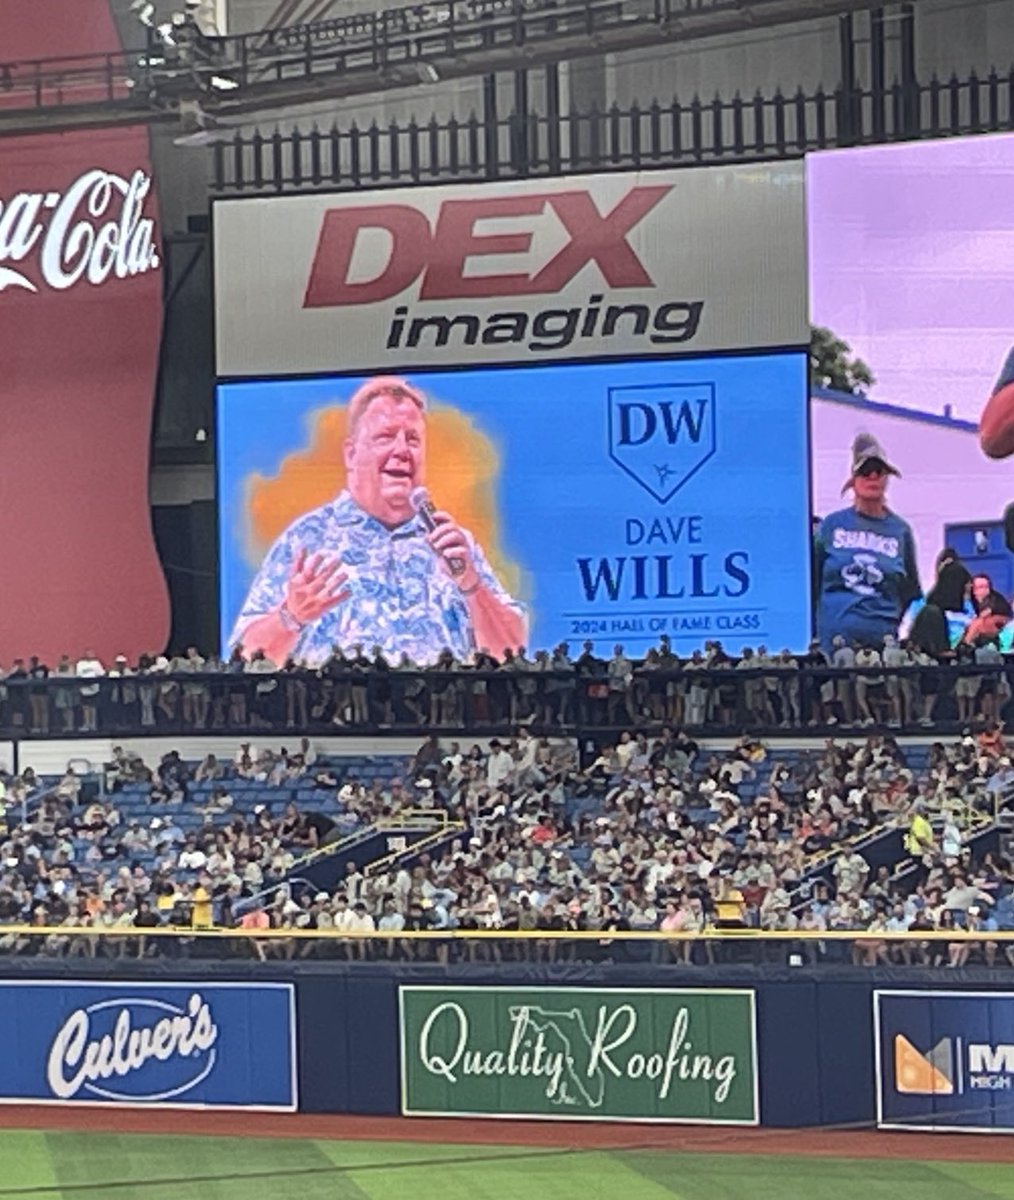 Mixed emotions ⁦@TheTrop⁩ as my friend ⁦@davewills34⁩ is inducted into the ⁦@RaysBaseball⁩ Hall of Fame. I’m sure he is looking down so proud but he is sorely missed.